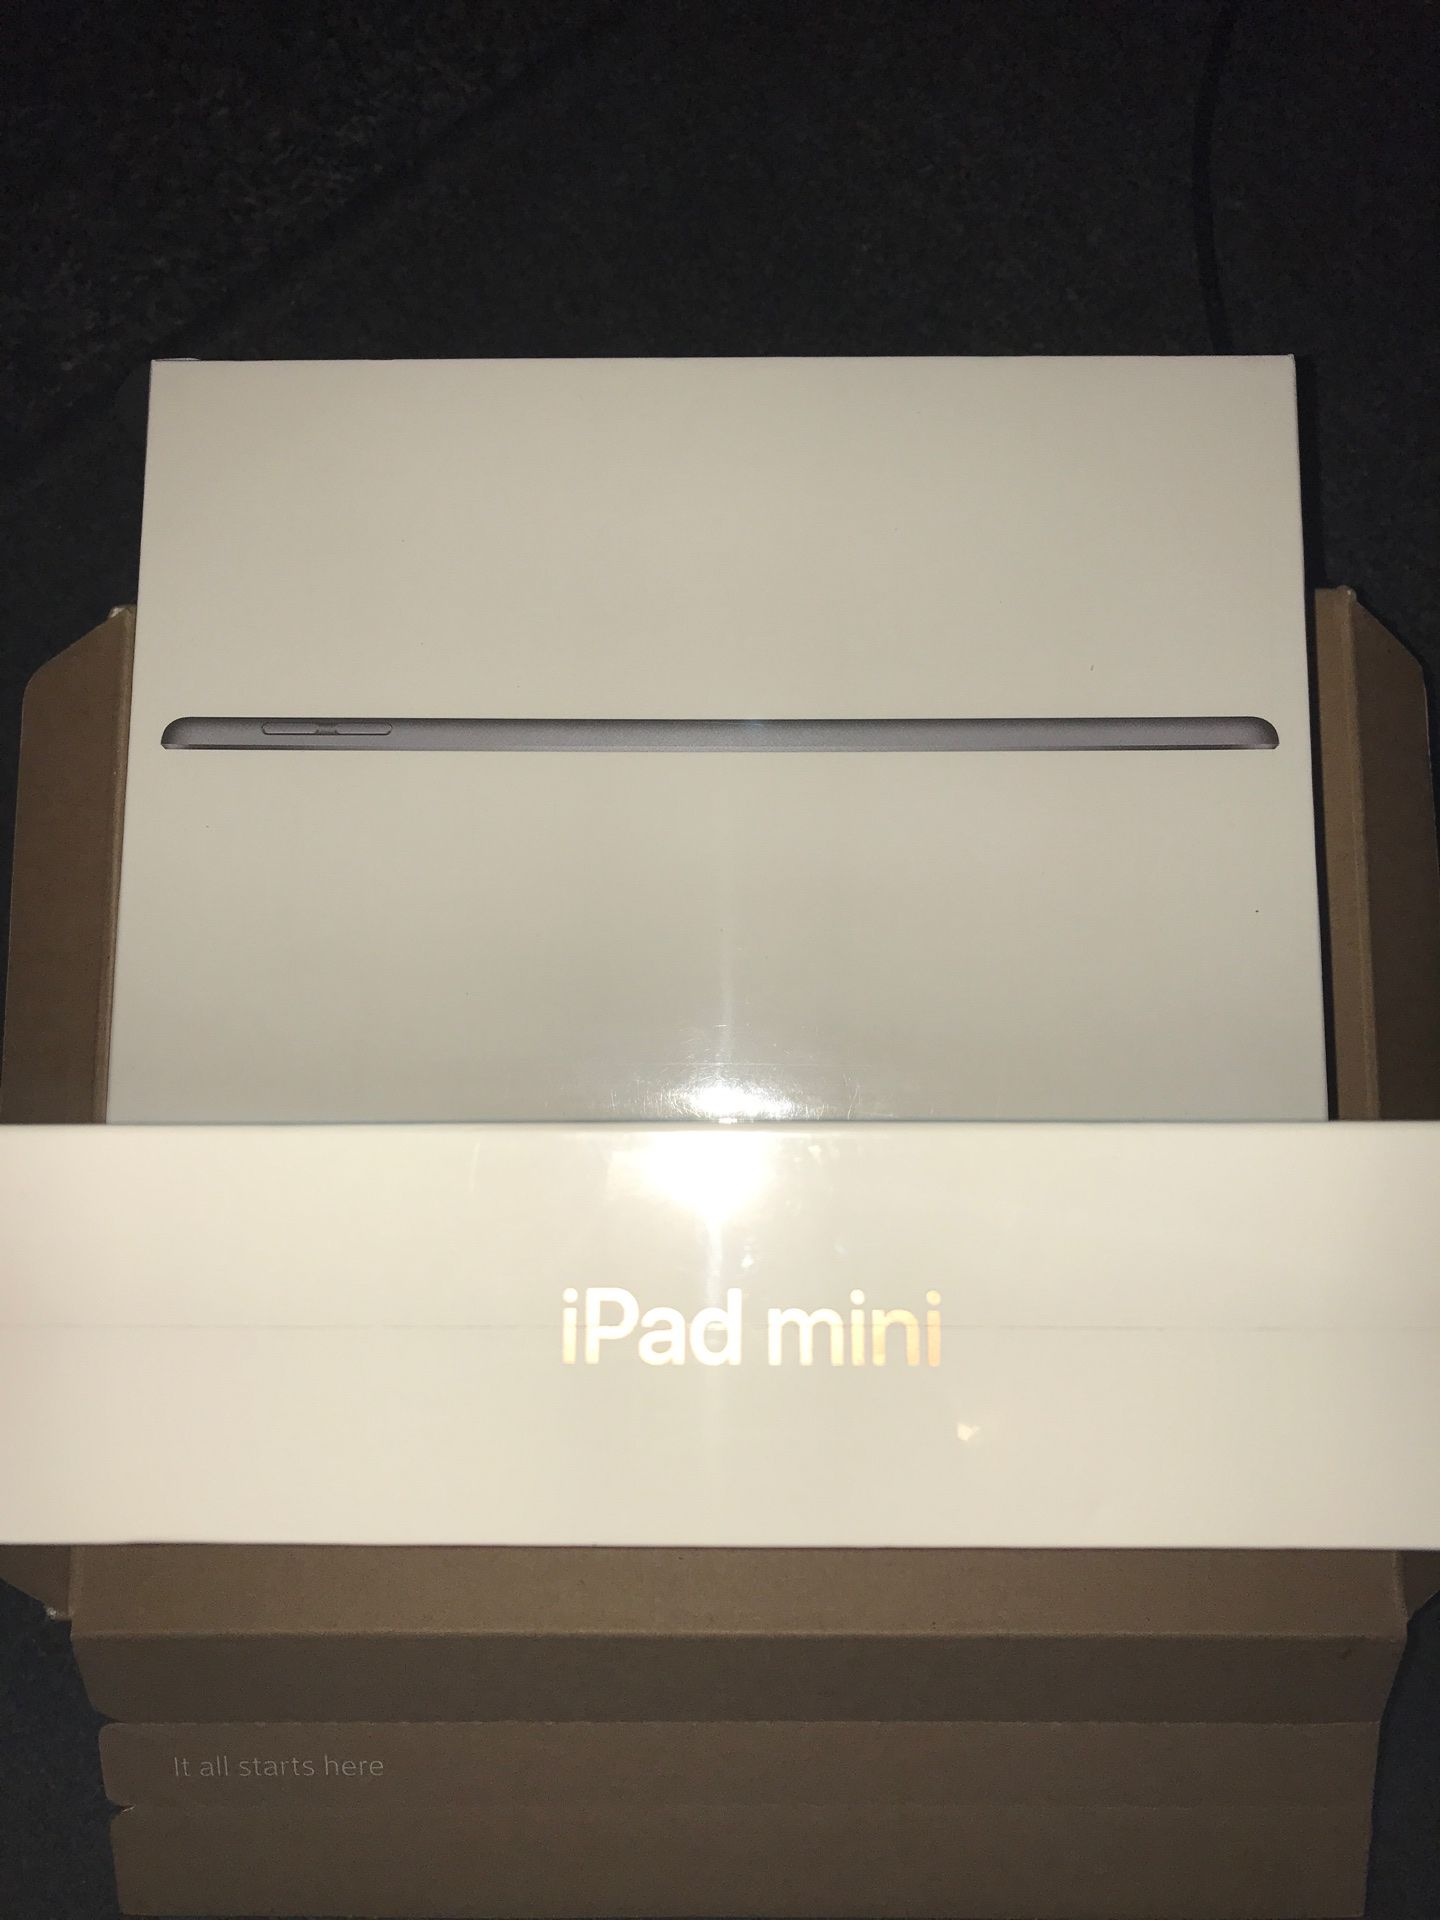 APPLE IPAD MINI 5 WiFi + CELLULAR GOLD OR GREY COLORS 64G BRAND NEW IN BOX